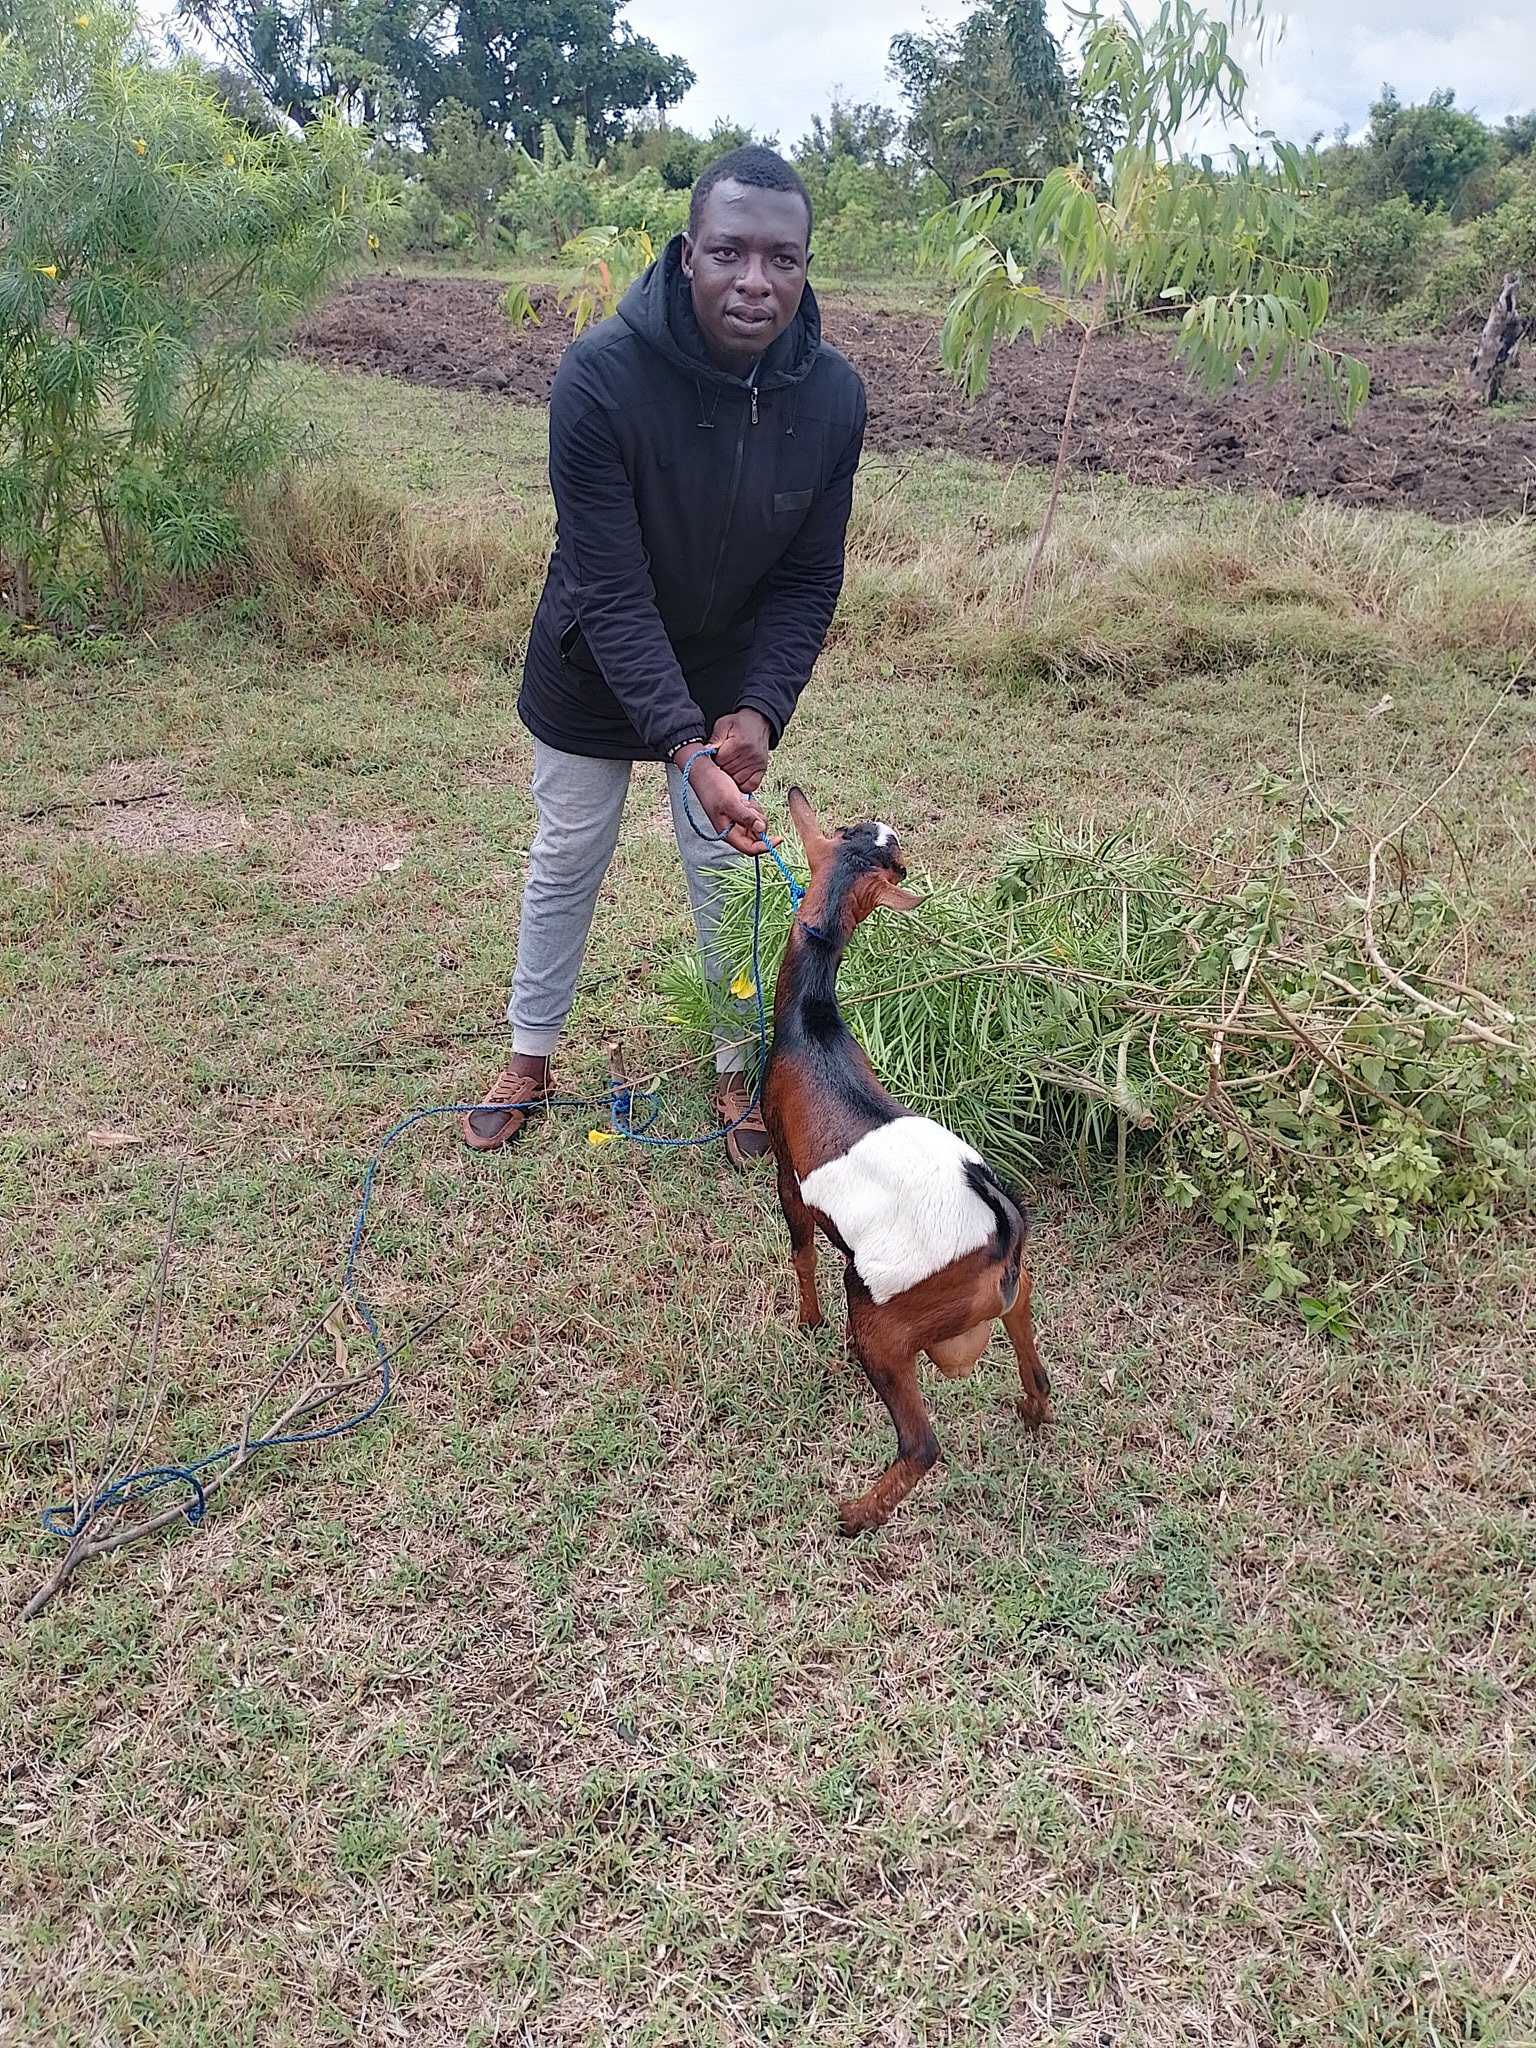 Source: Richard Opany pictured with one of his goats, as shared on X with the caption "The goats are well everyone"